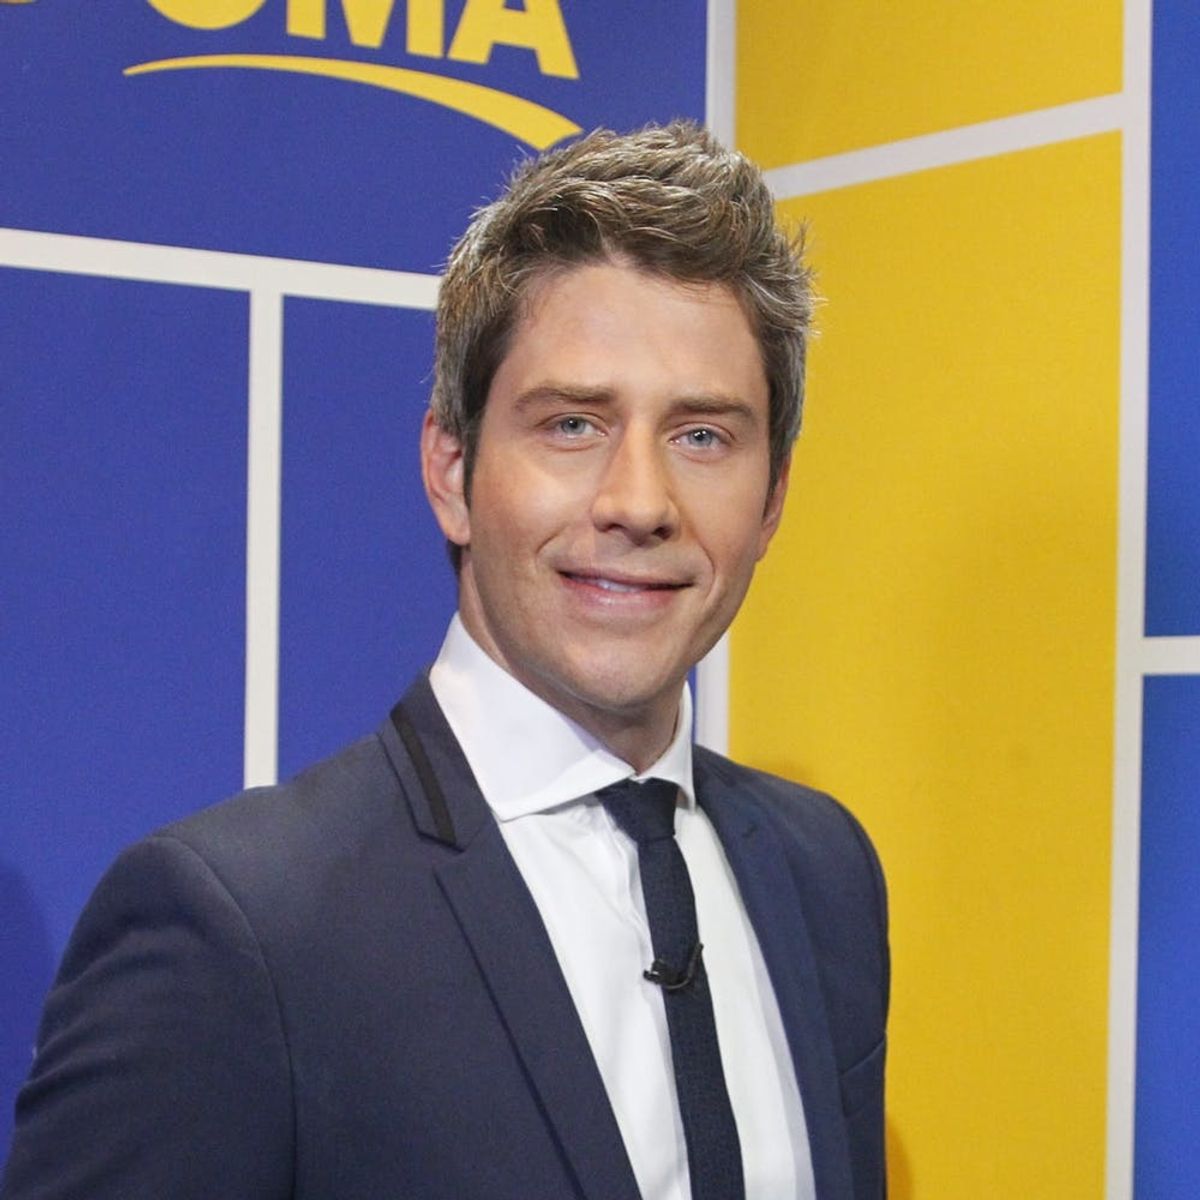 Here’s Your First Look at Arie Luyendyk Jr in the Upcoming Season of “The Bachelor”